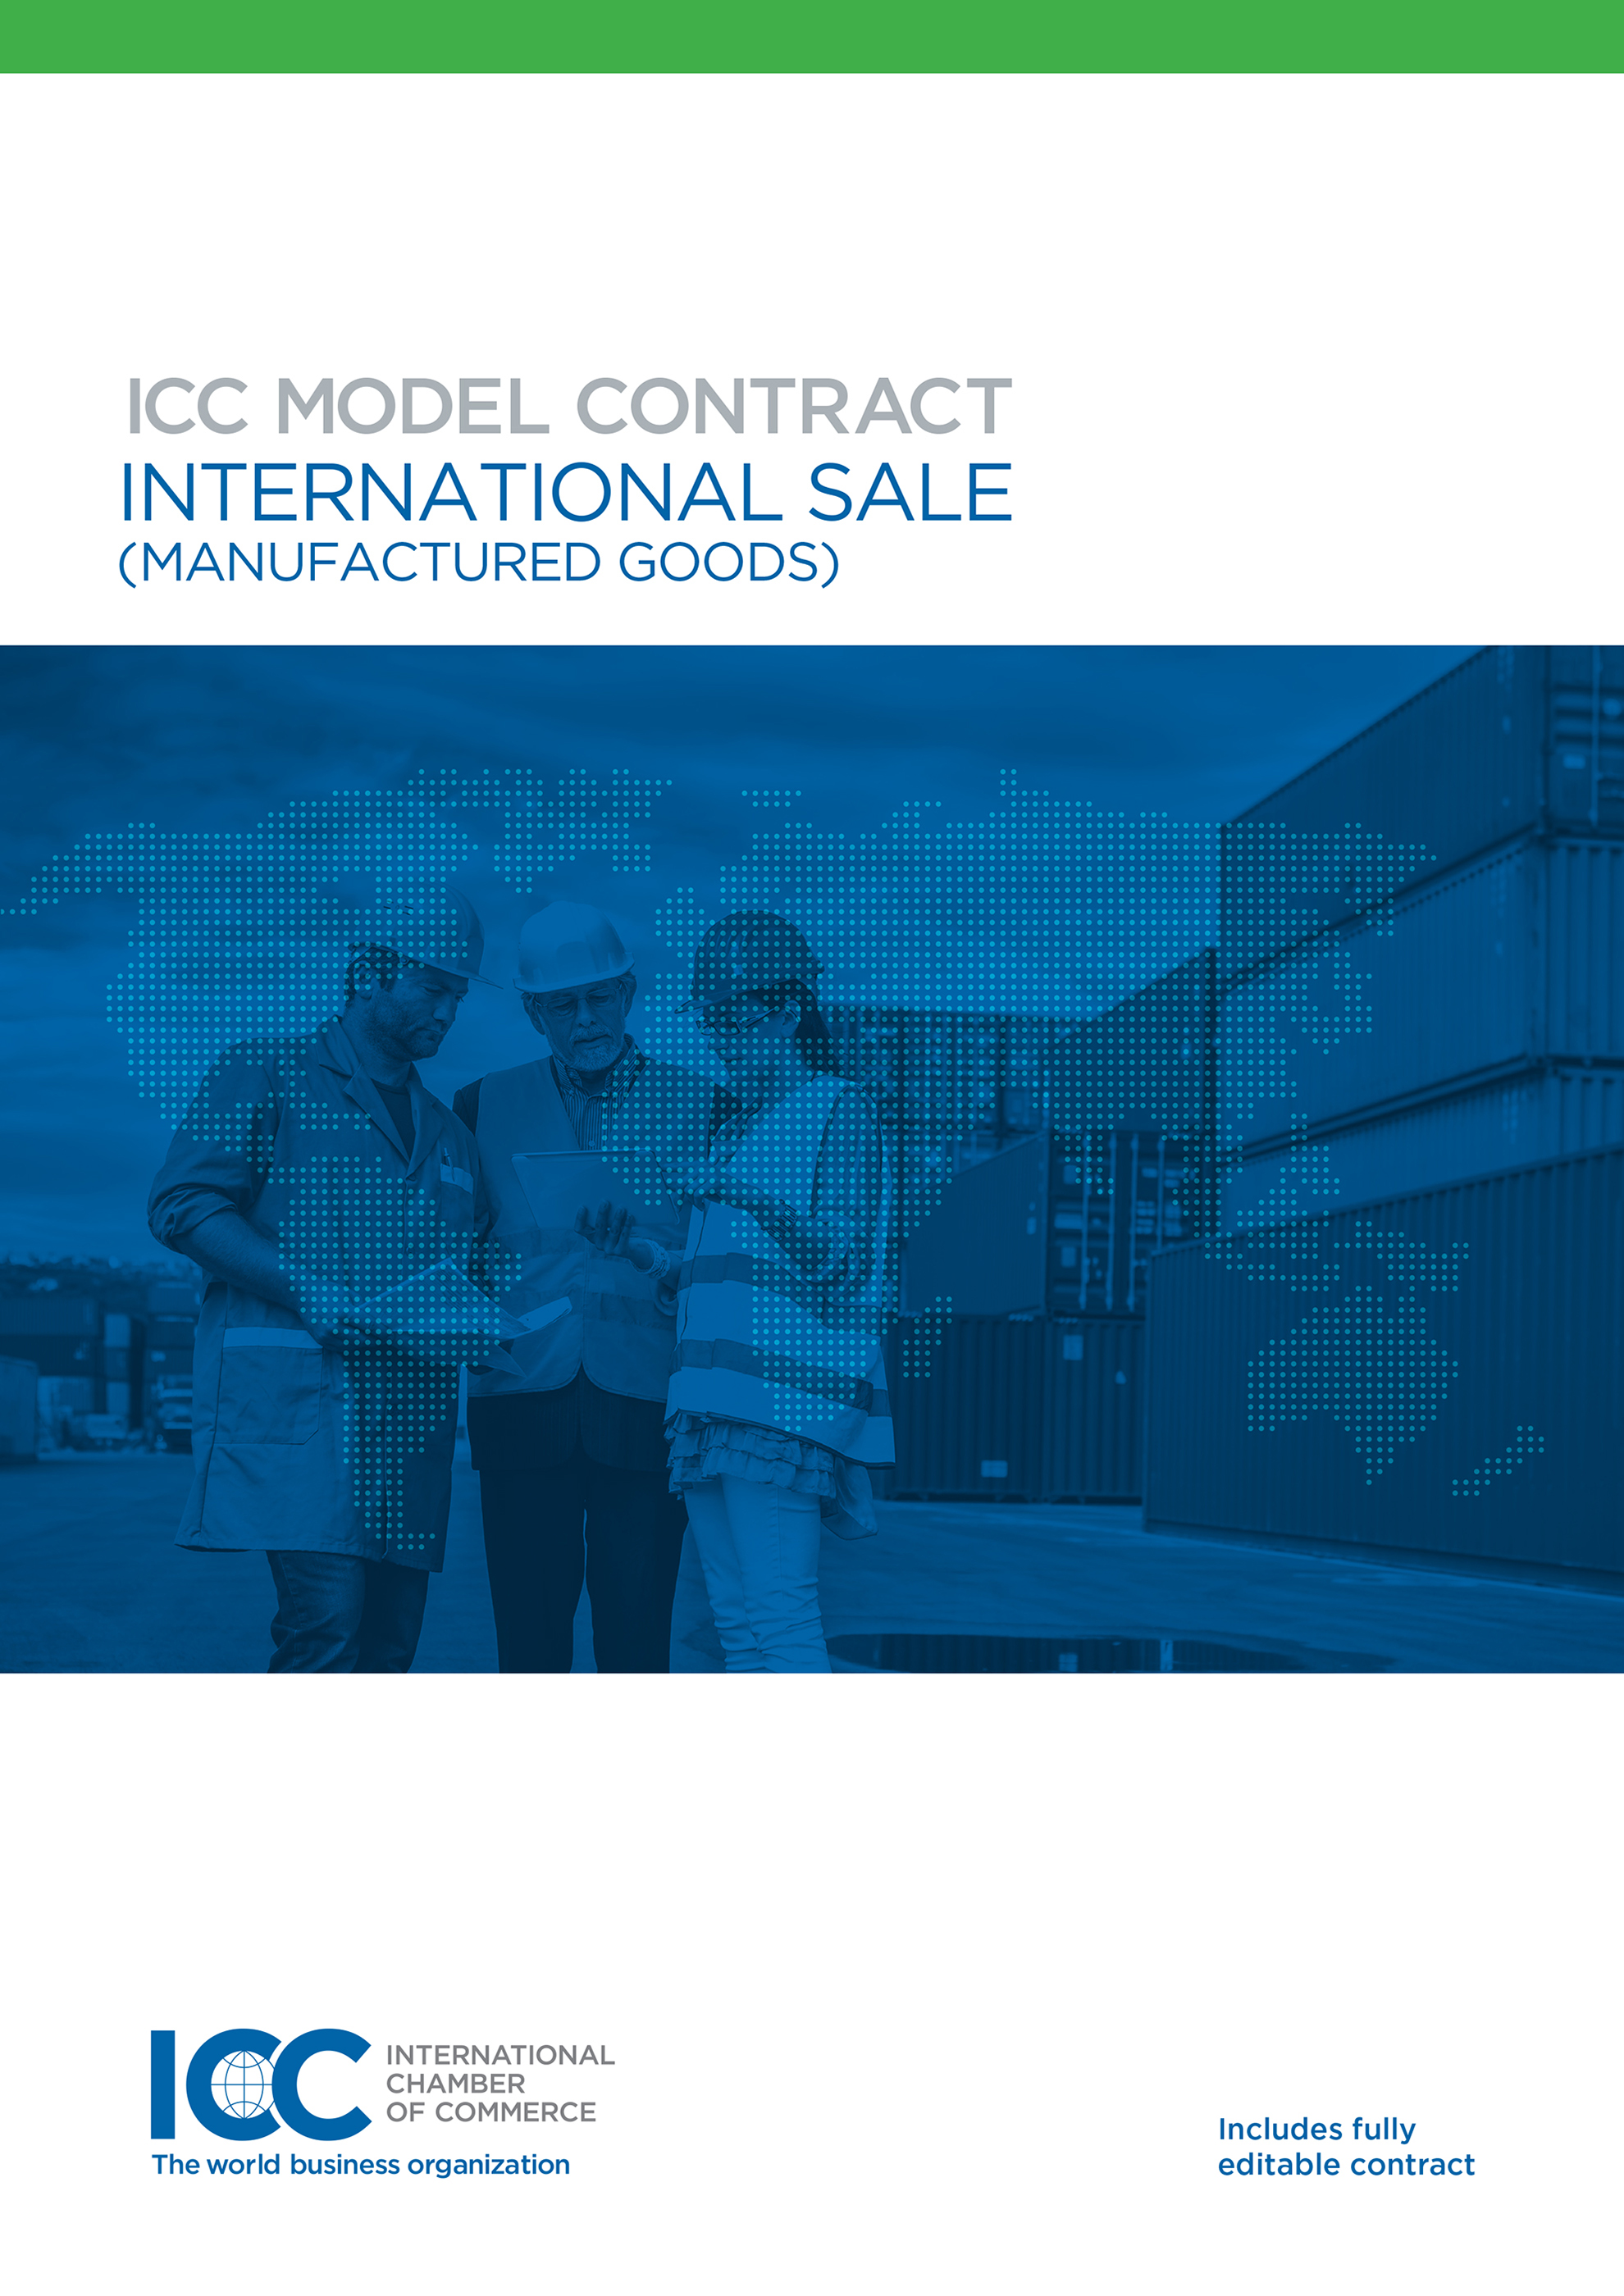 ICC Model Contract - International Sale (Manufactured Goods)